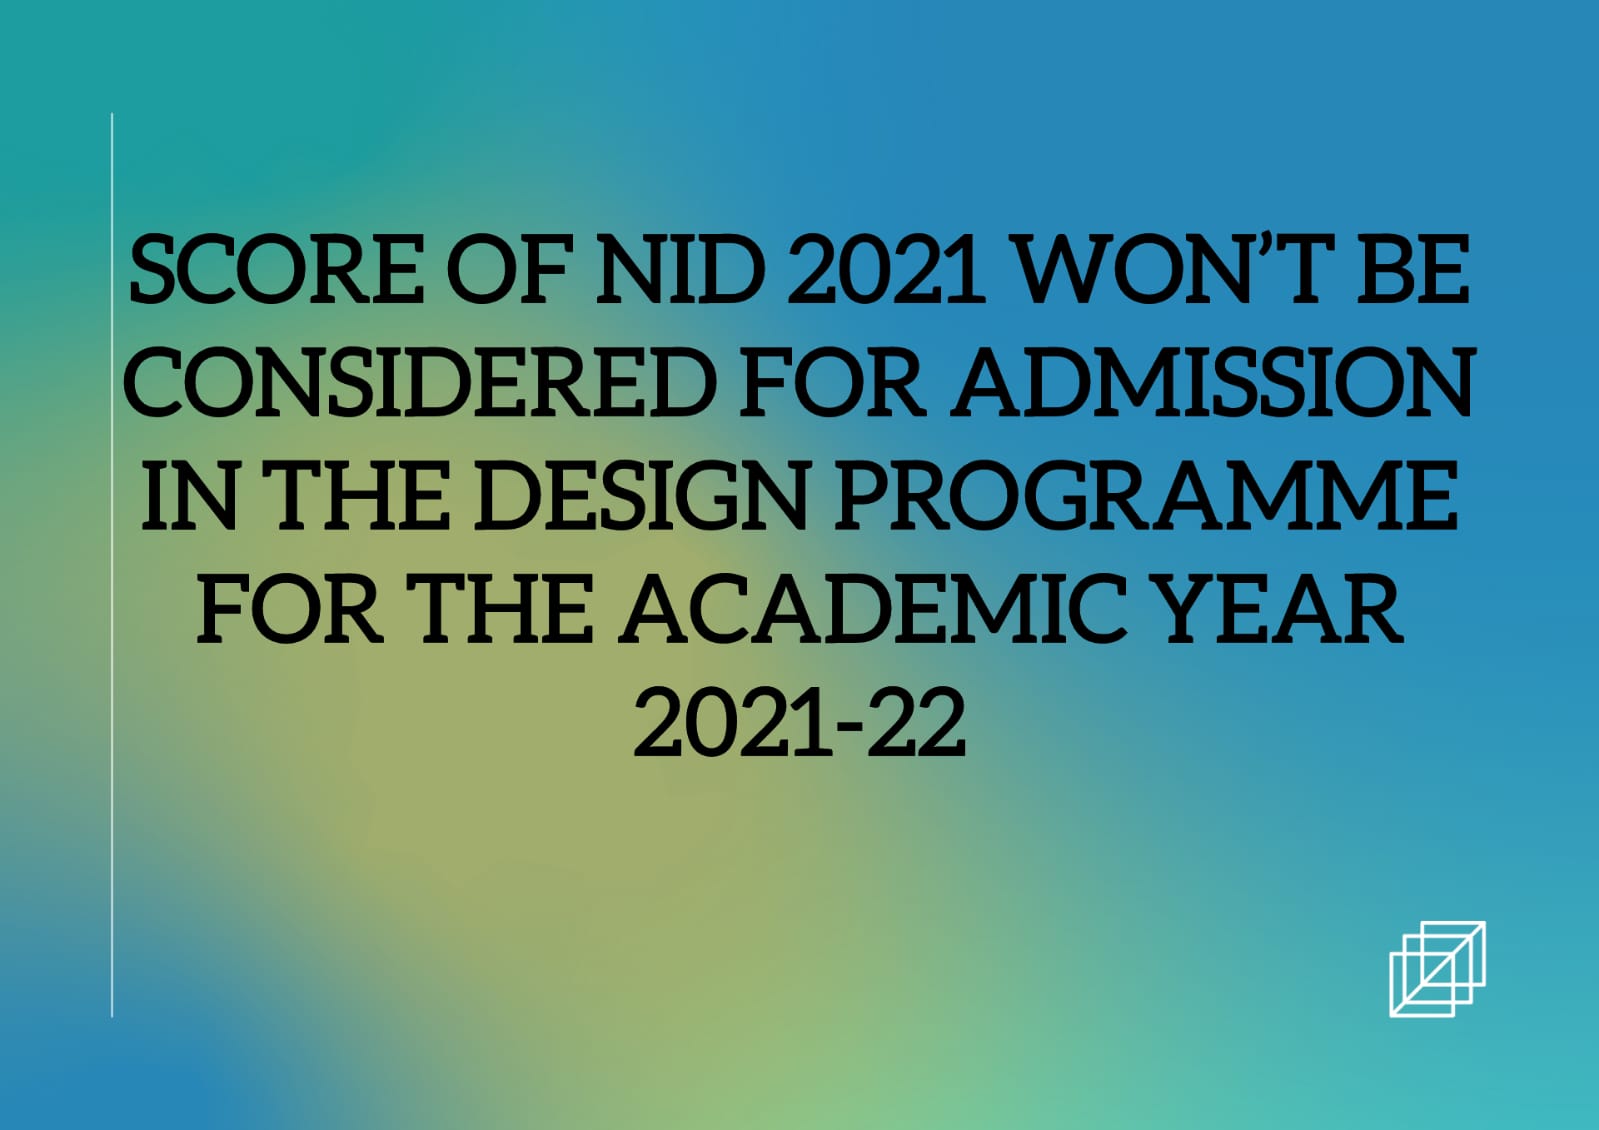 SCORE OF NID 2021  WON’T BE CONSIDERED FOR ADMISSION IN THE DESIGN PROGRAMME  FOR THE ACADEMIC YEAR 2021-22